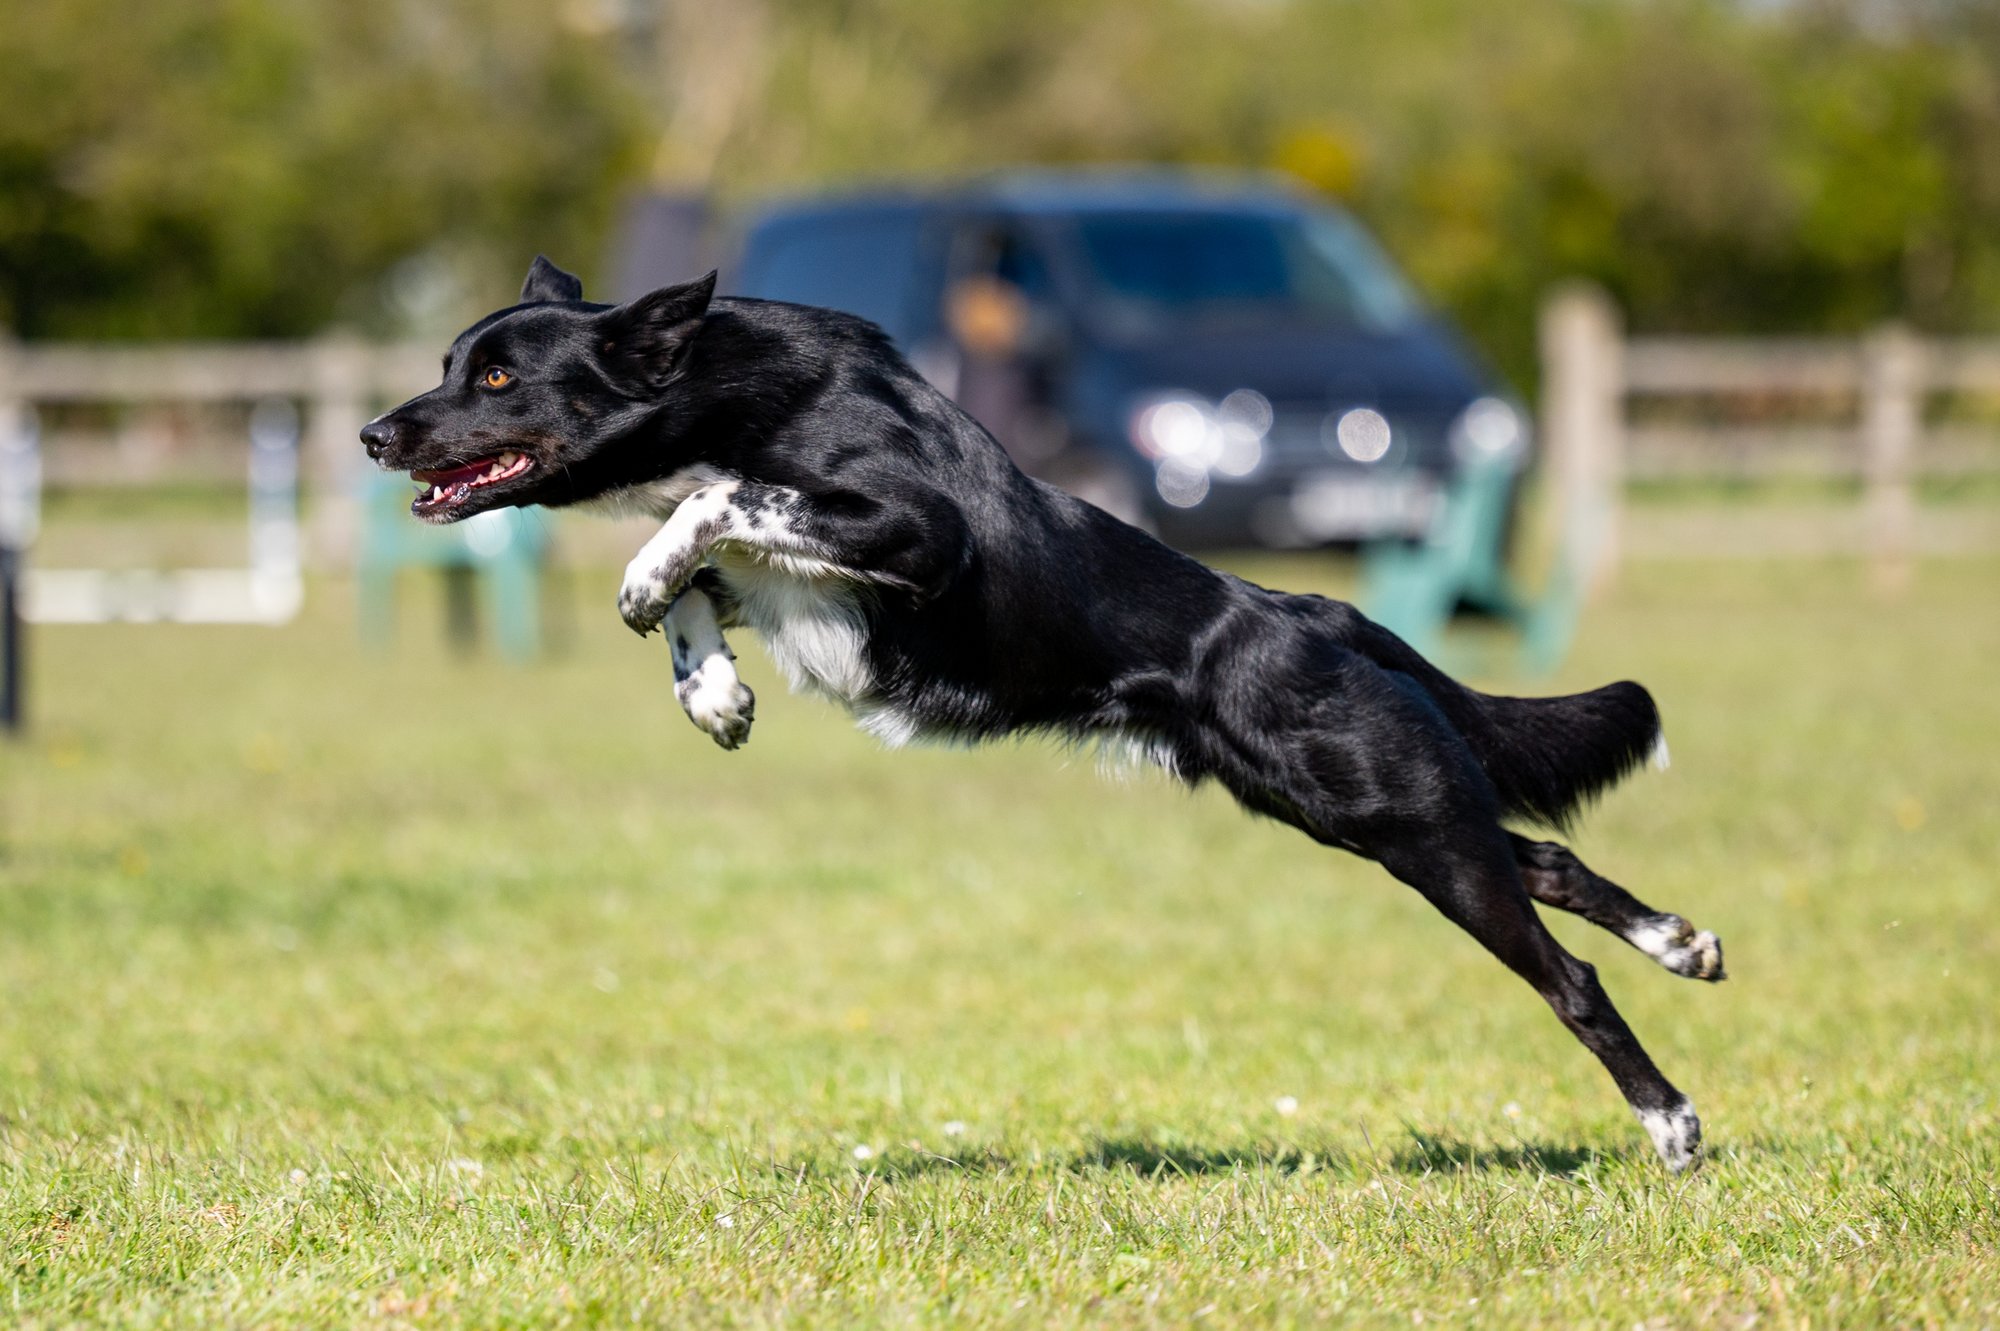 A Dog jumping up in the air, during an agility competition